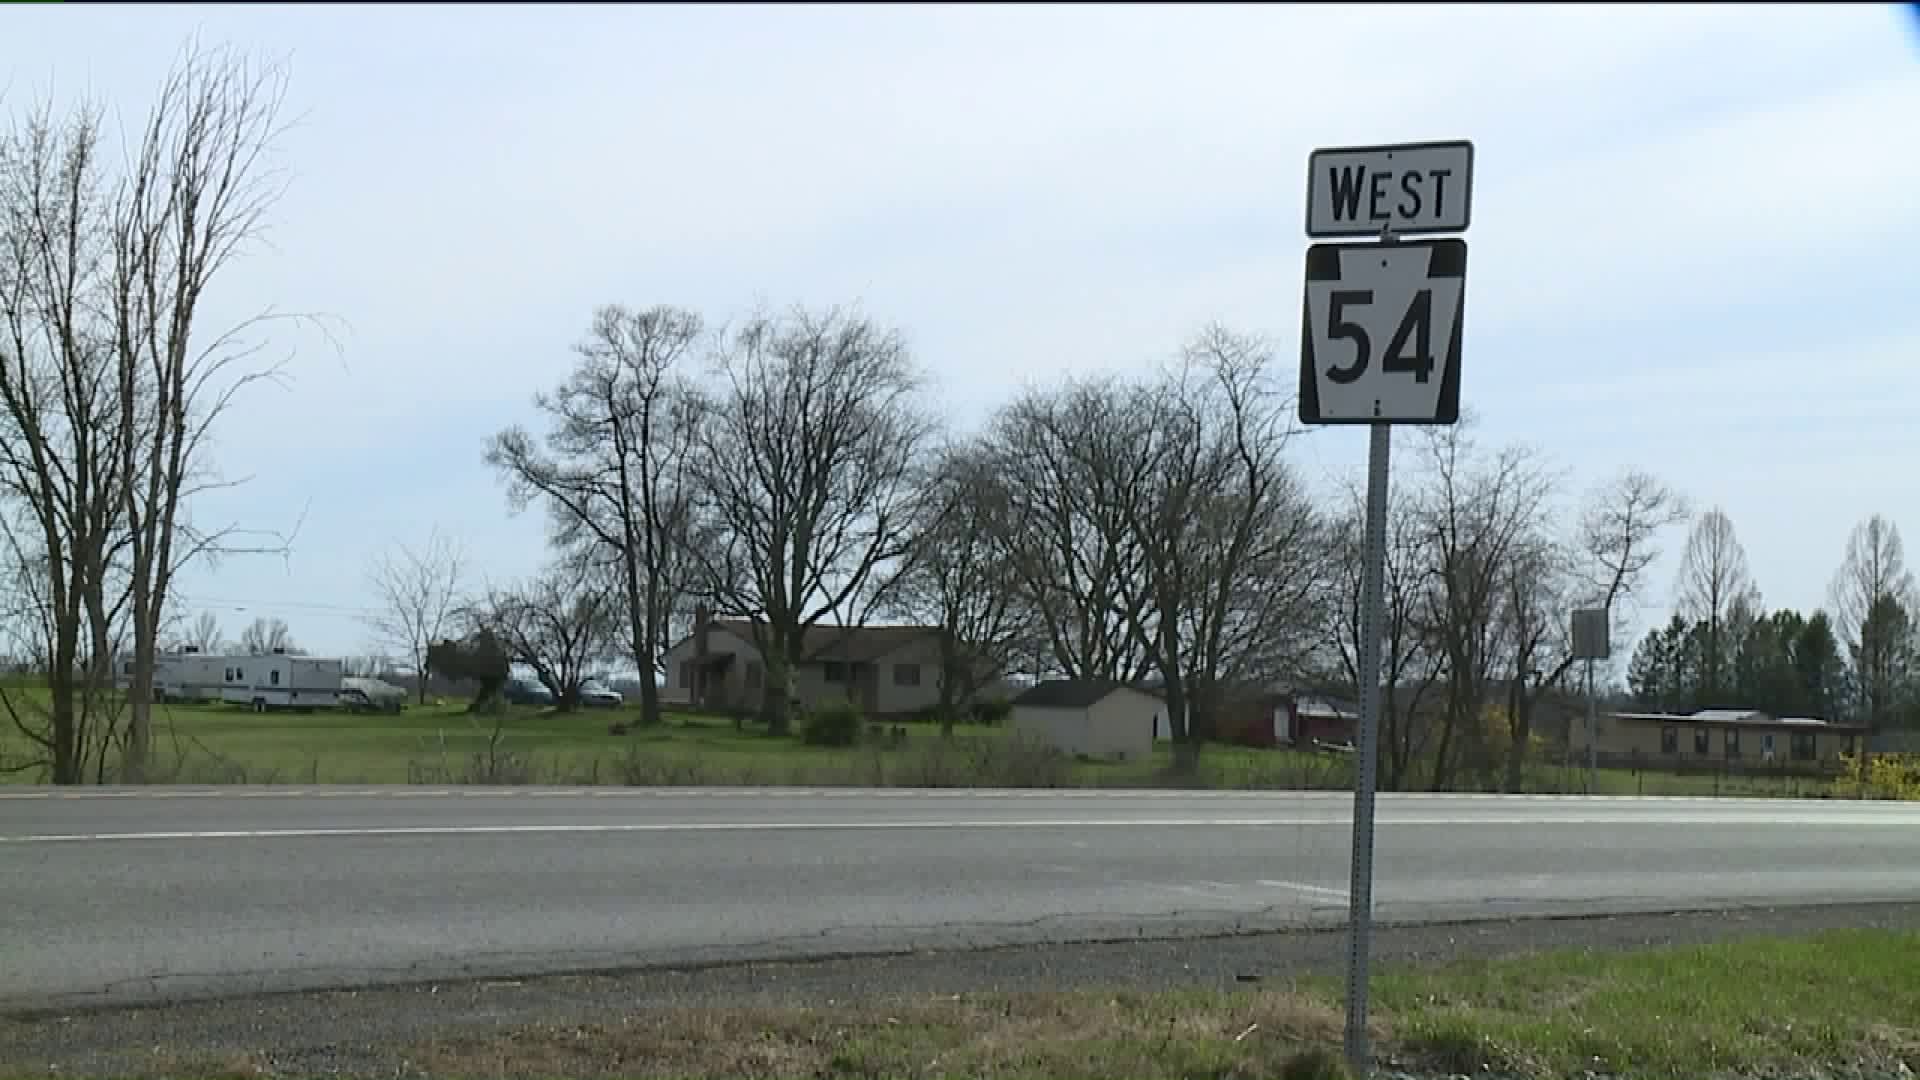 Amish School, Crashes Lead to Lower Speed Limit on Route 54